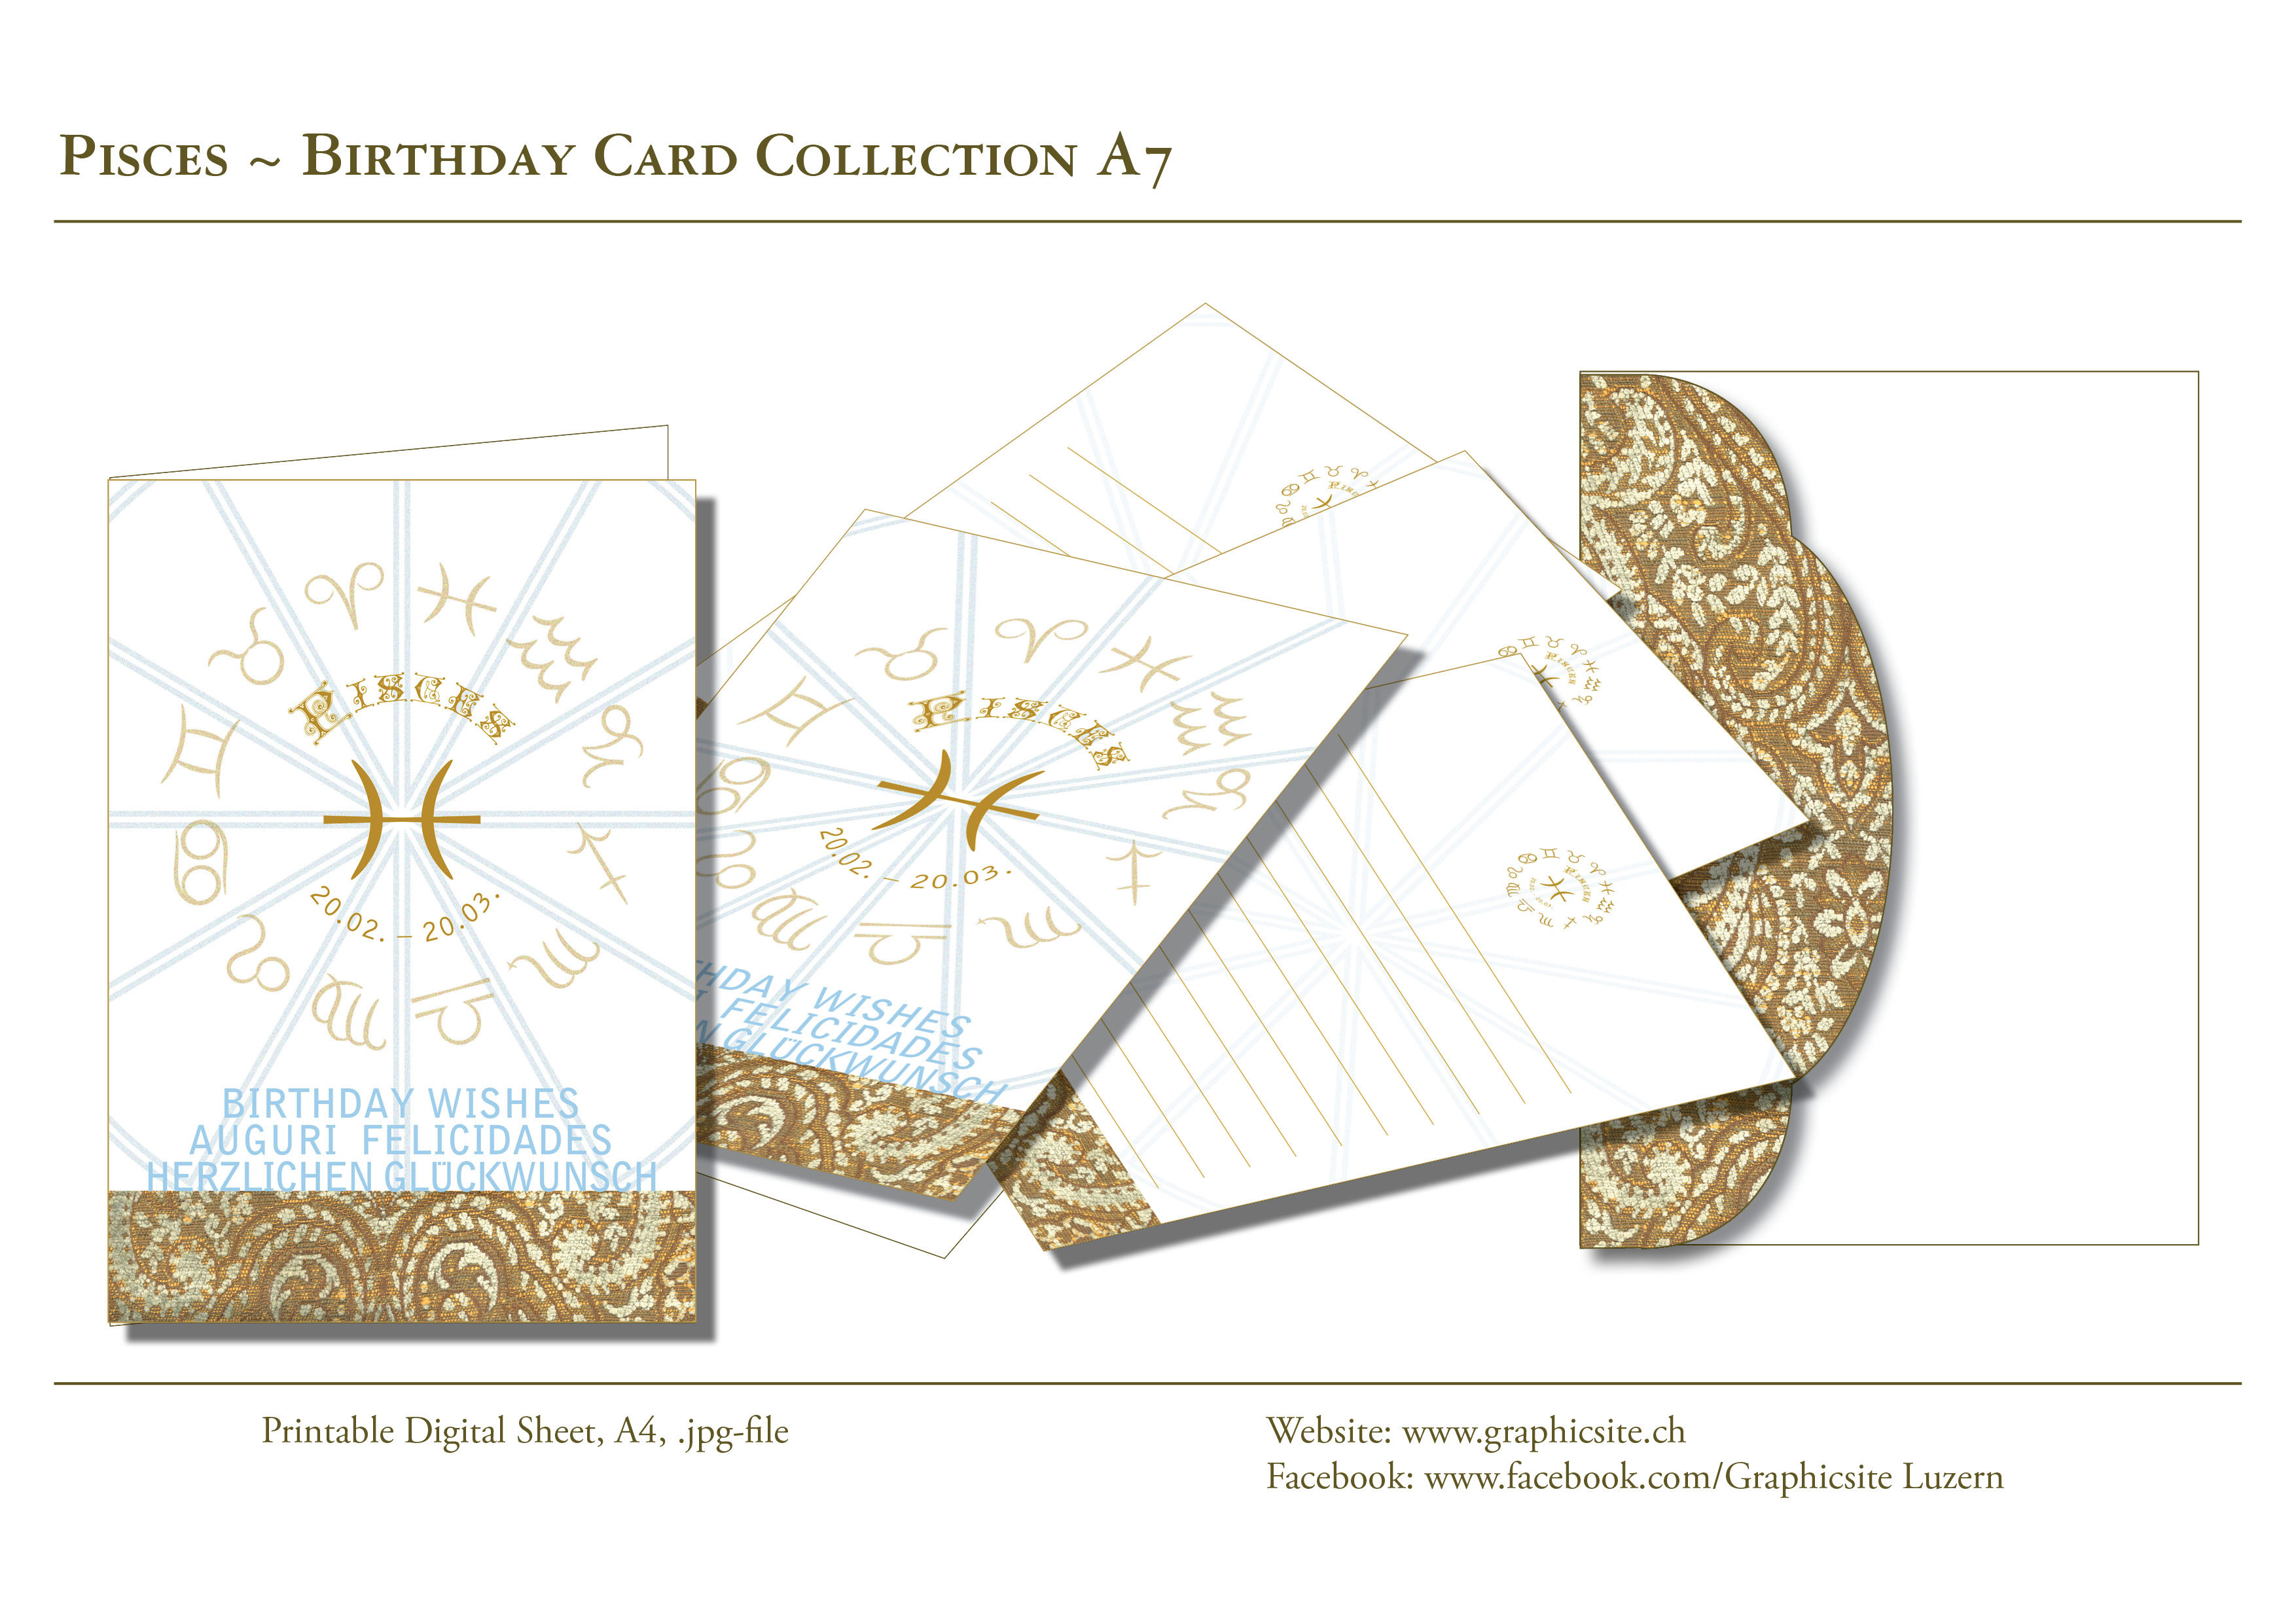 Printable Digital Sheets - Birthday Card Collection - Horoscope - Zodiac - Pisces A7 - GraphicDesign, Luzern